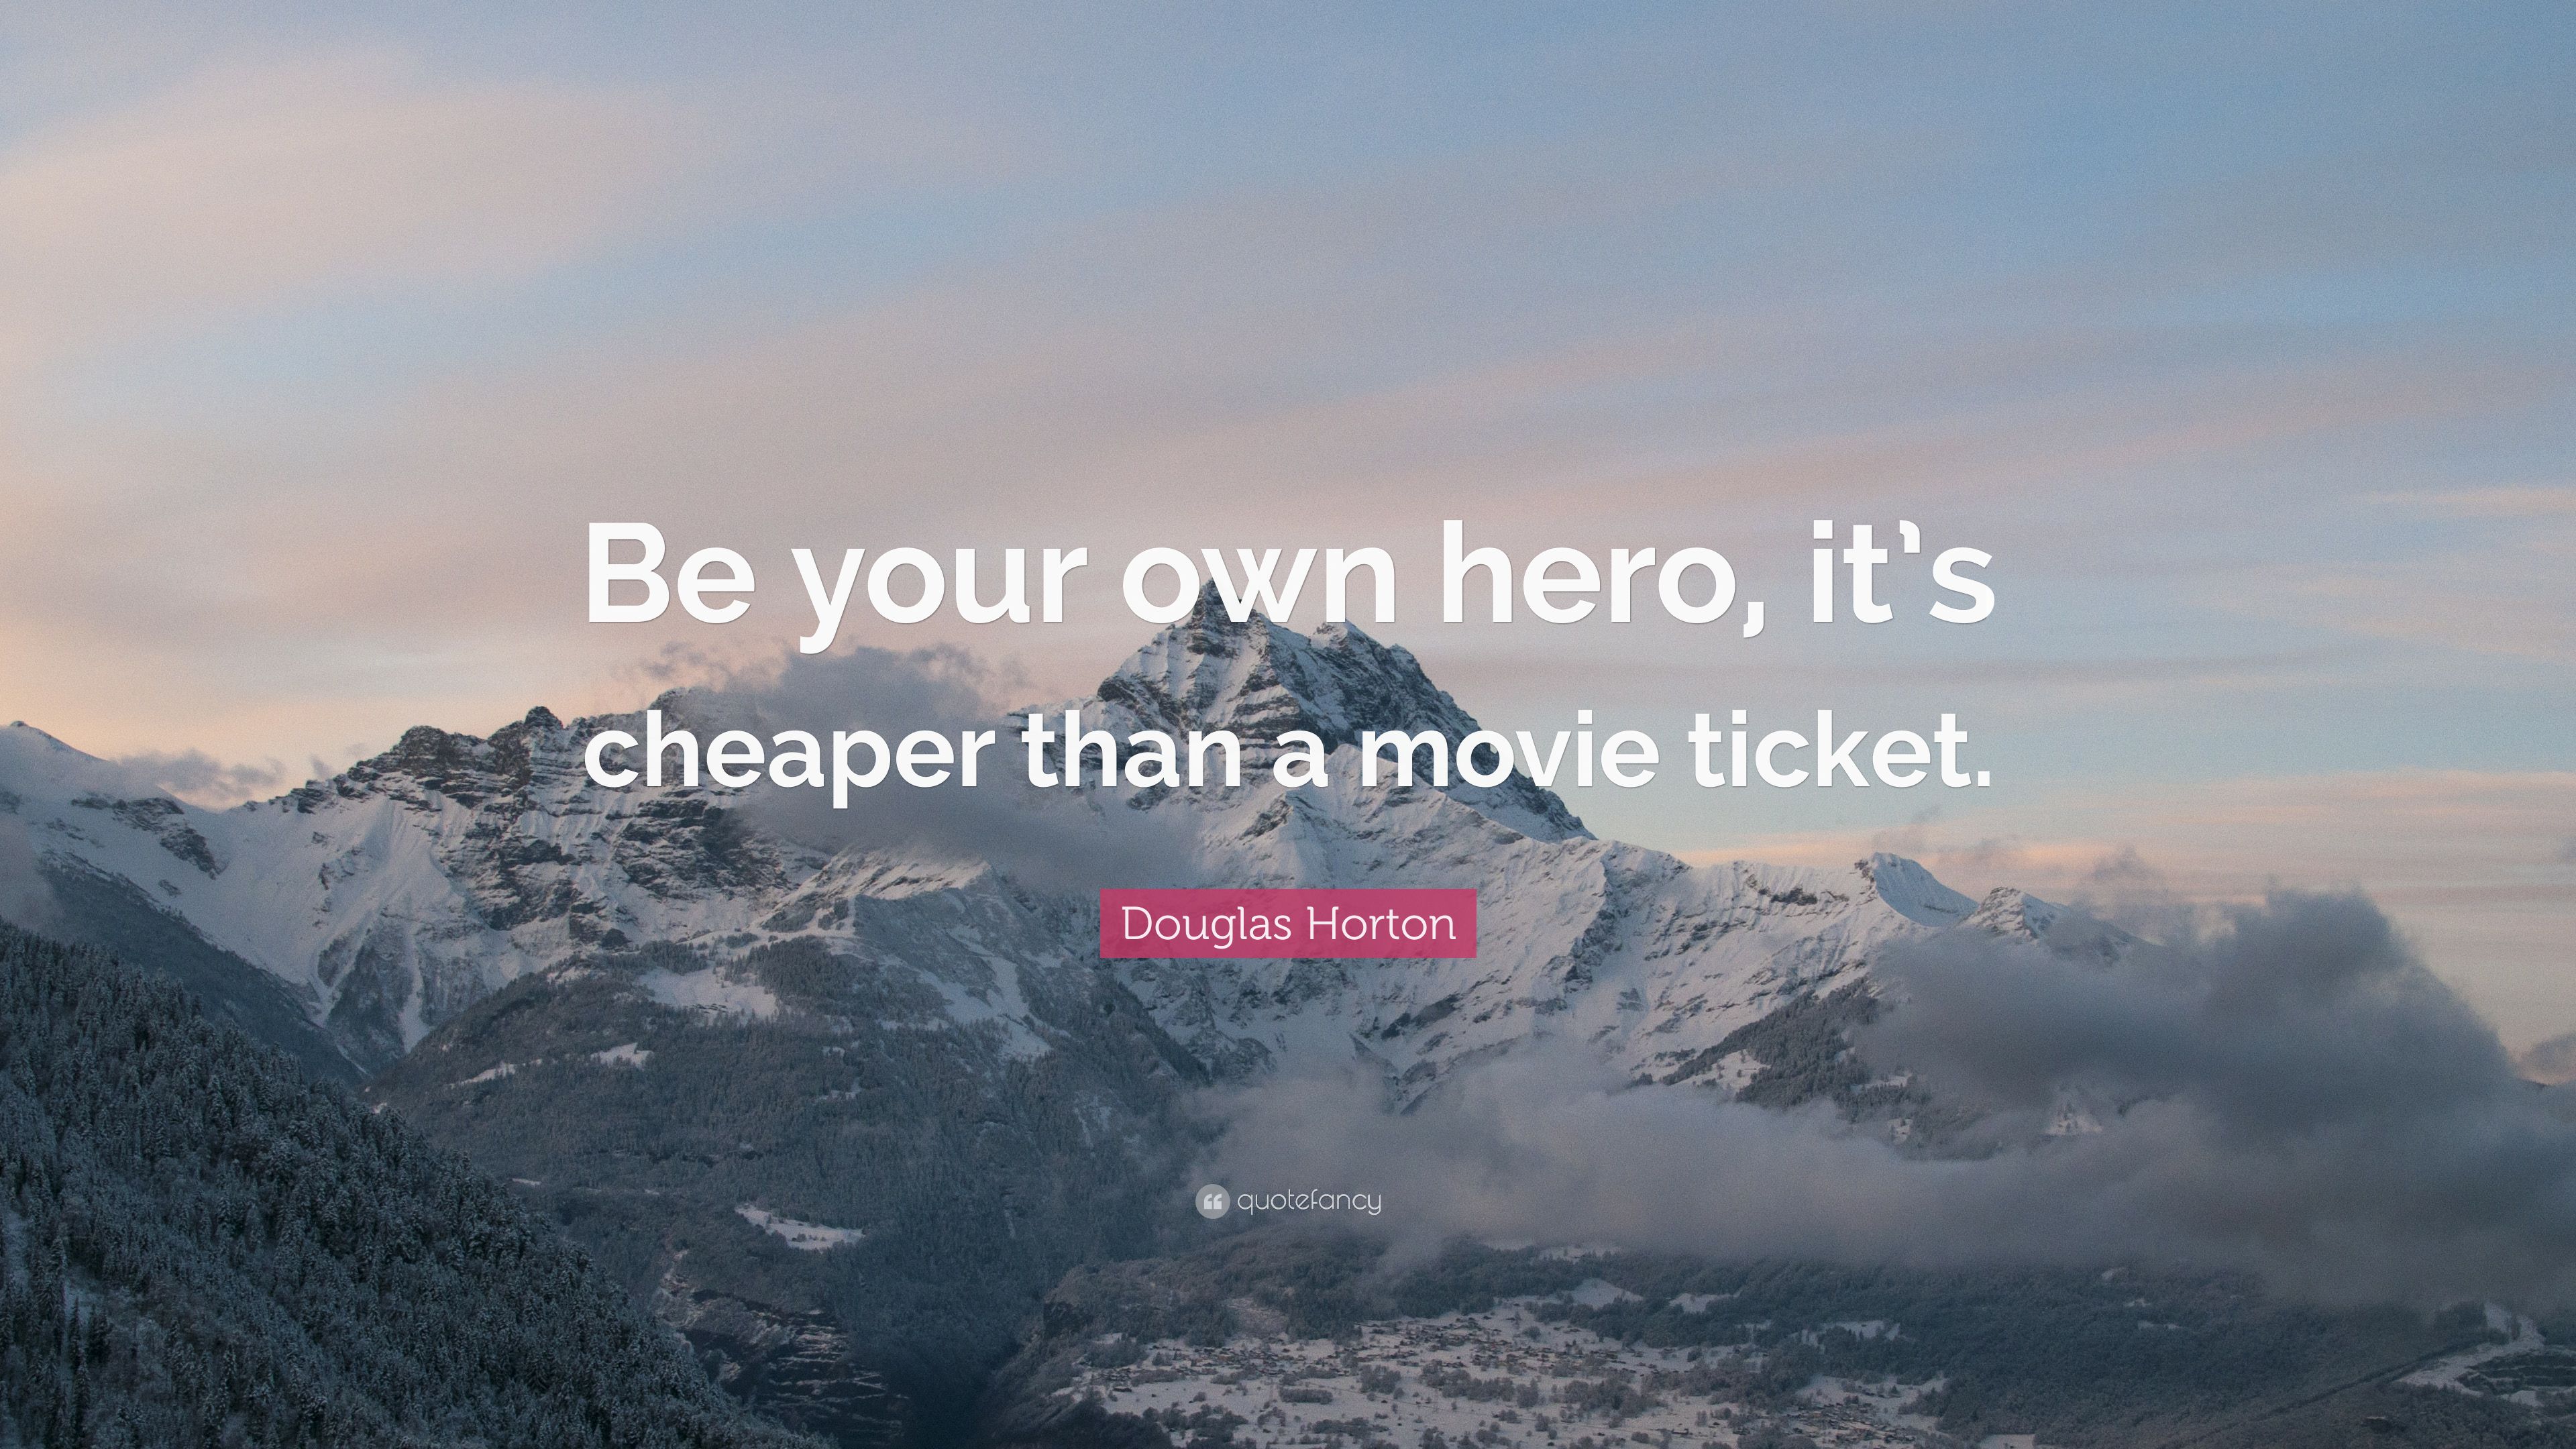 cheaper than a movie ticket .quotefancy.com